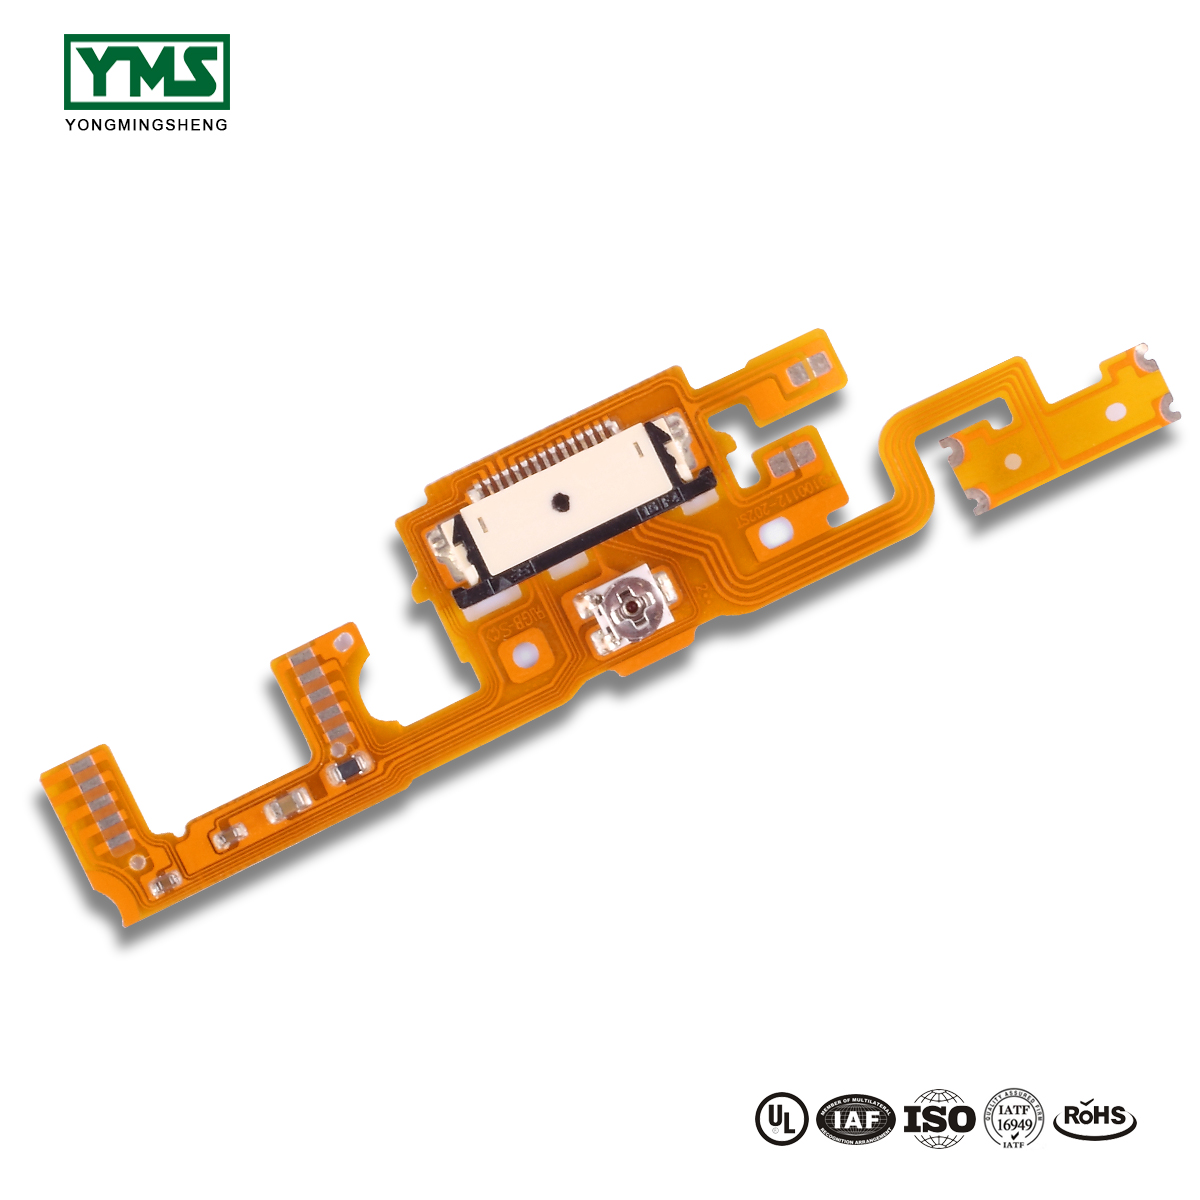 Massive Selection for Hearing Aids Printed Circuit Board - 1Layer Flexible Board | YMSPCB – Yongmingsheng